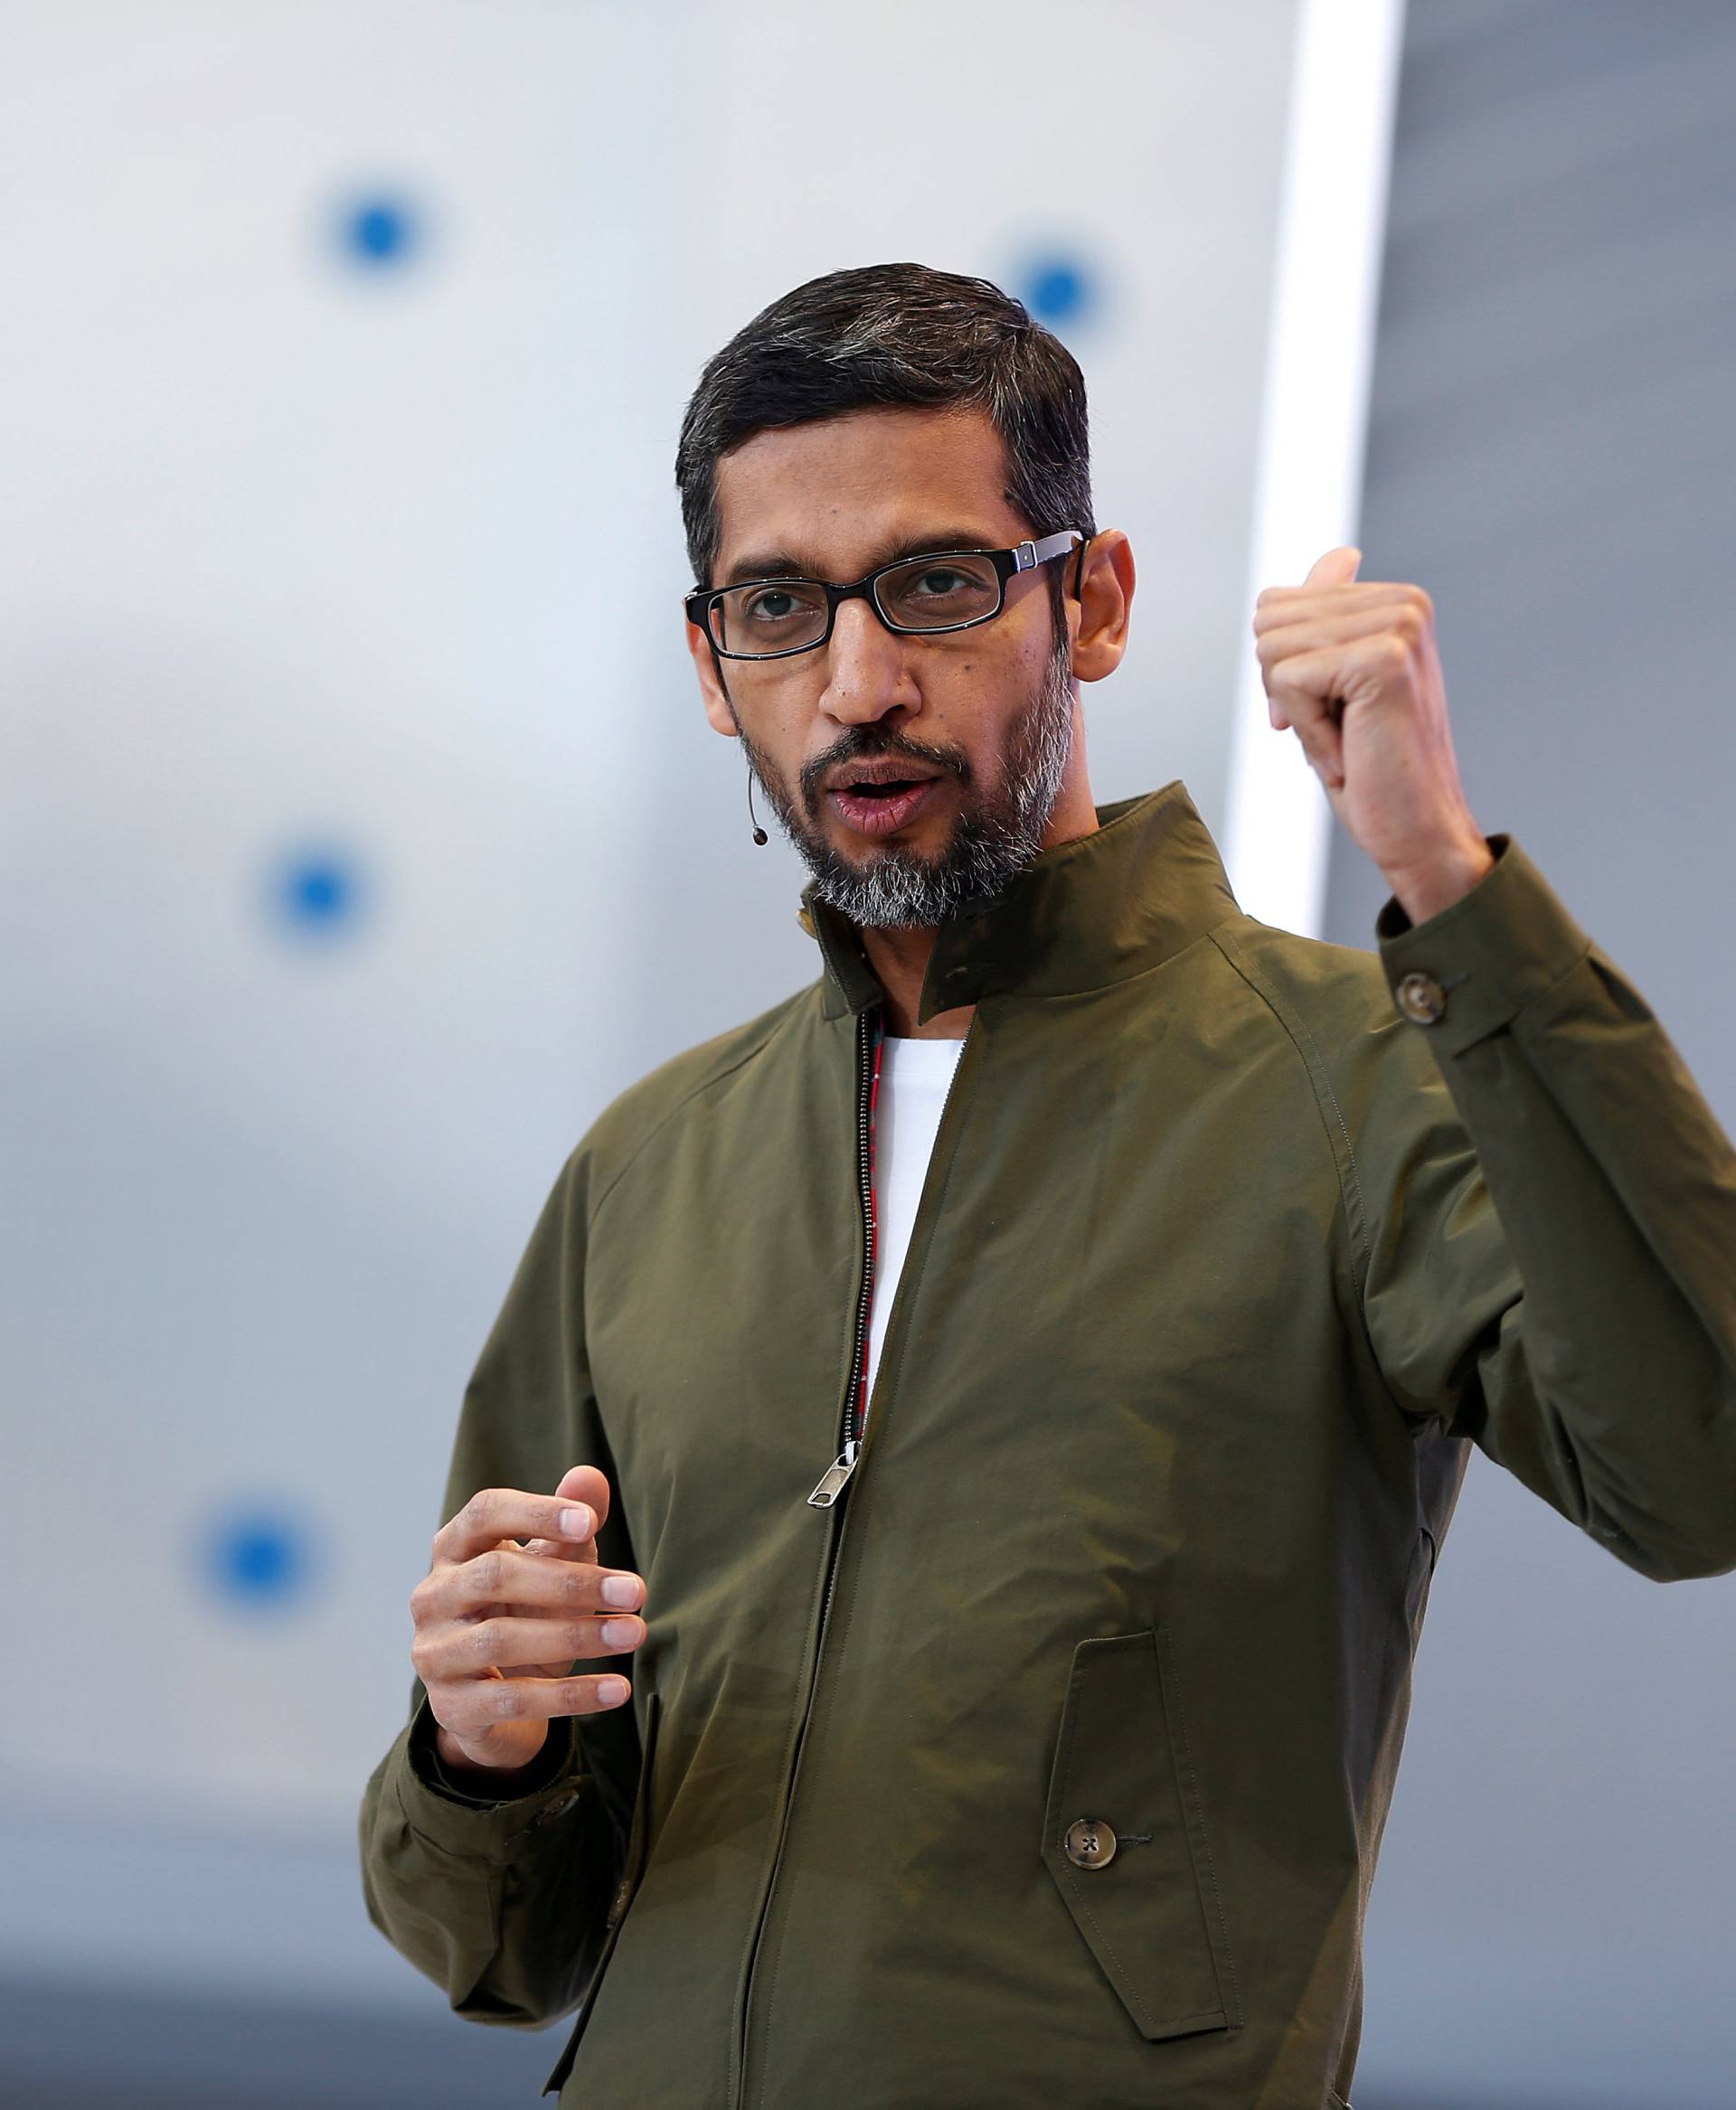 FILE PHOTO: Google CEO Sundar Pichai speaks on stage during the annual Google I/O developers conference in Mountain View